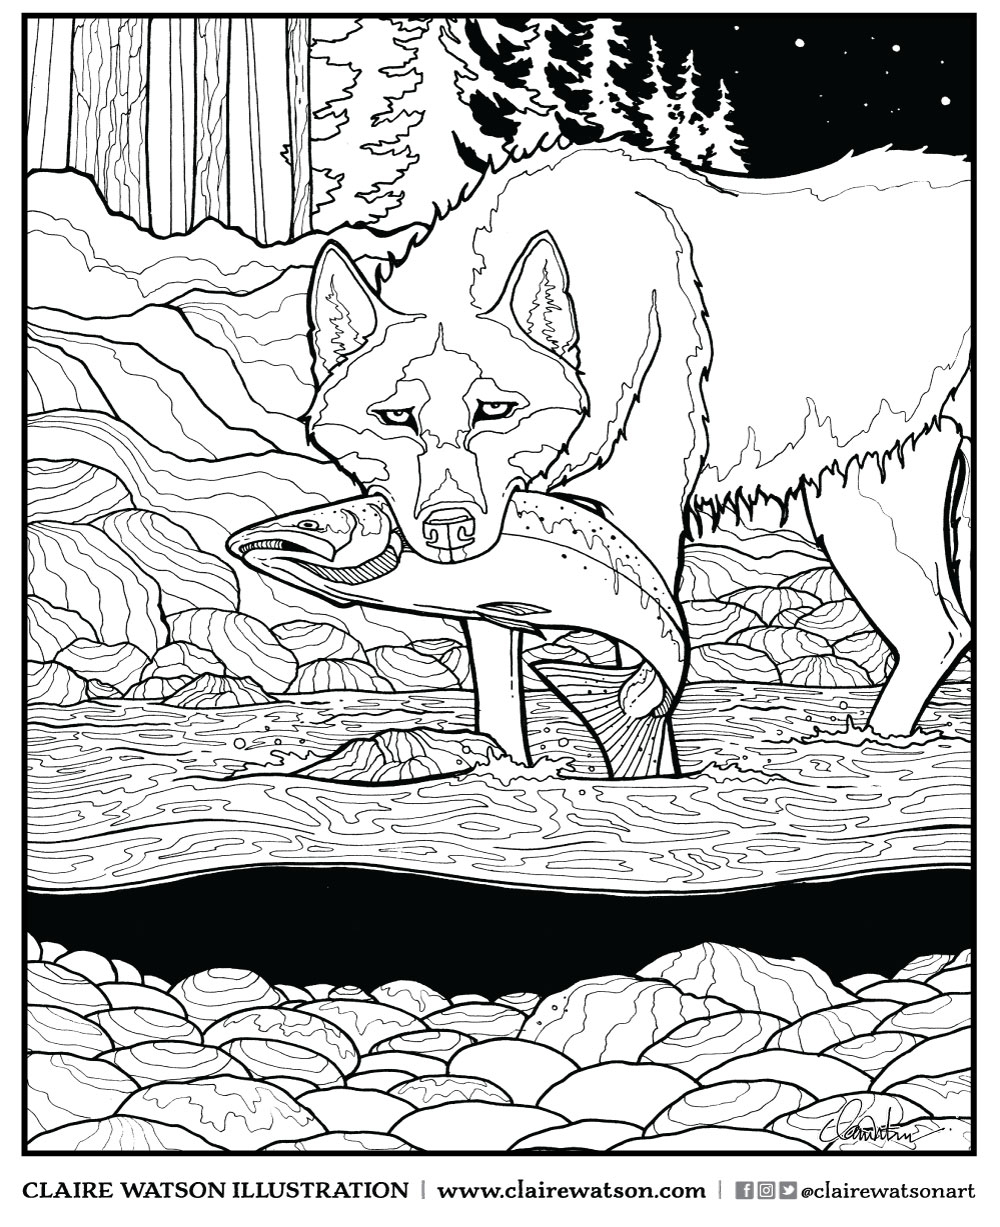 coastal-wolf-colouring-page-claire-watson.jpg